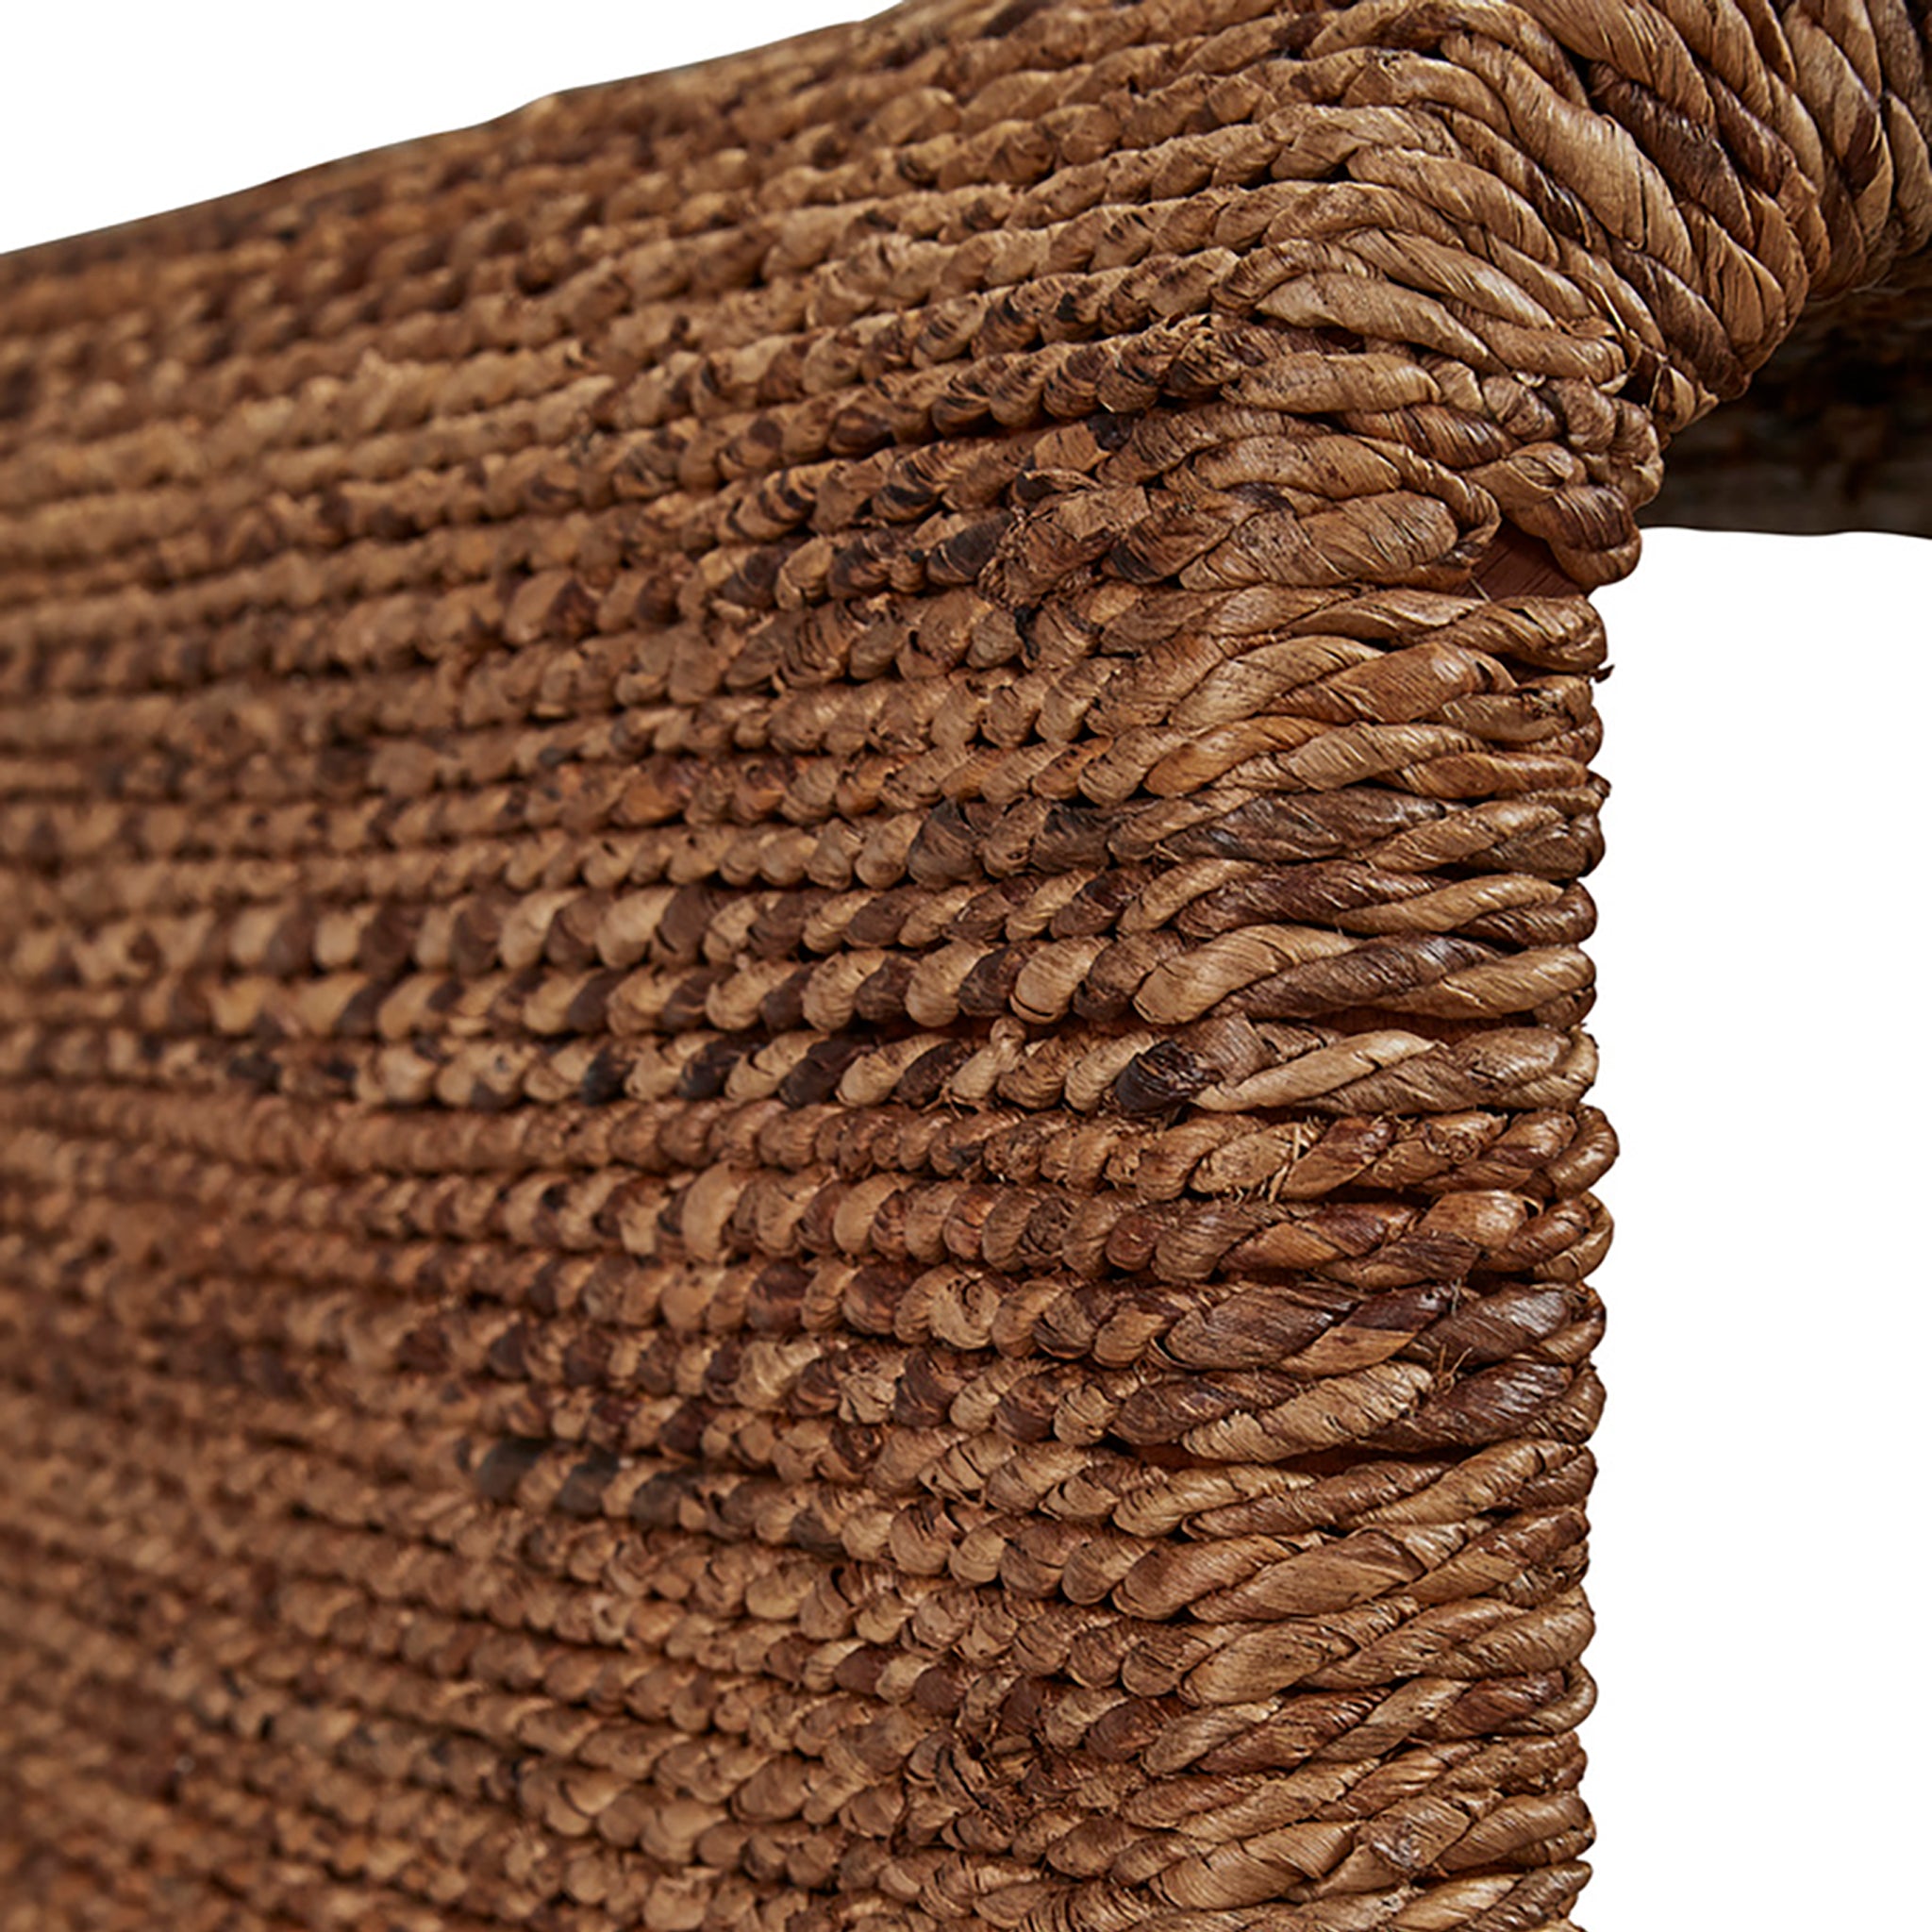 Woven Square End Table